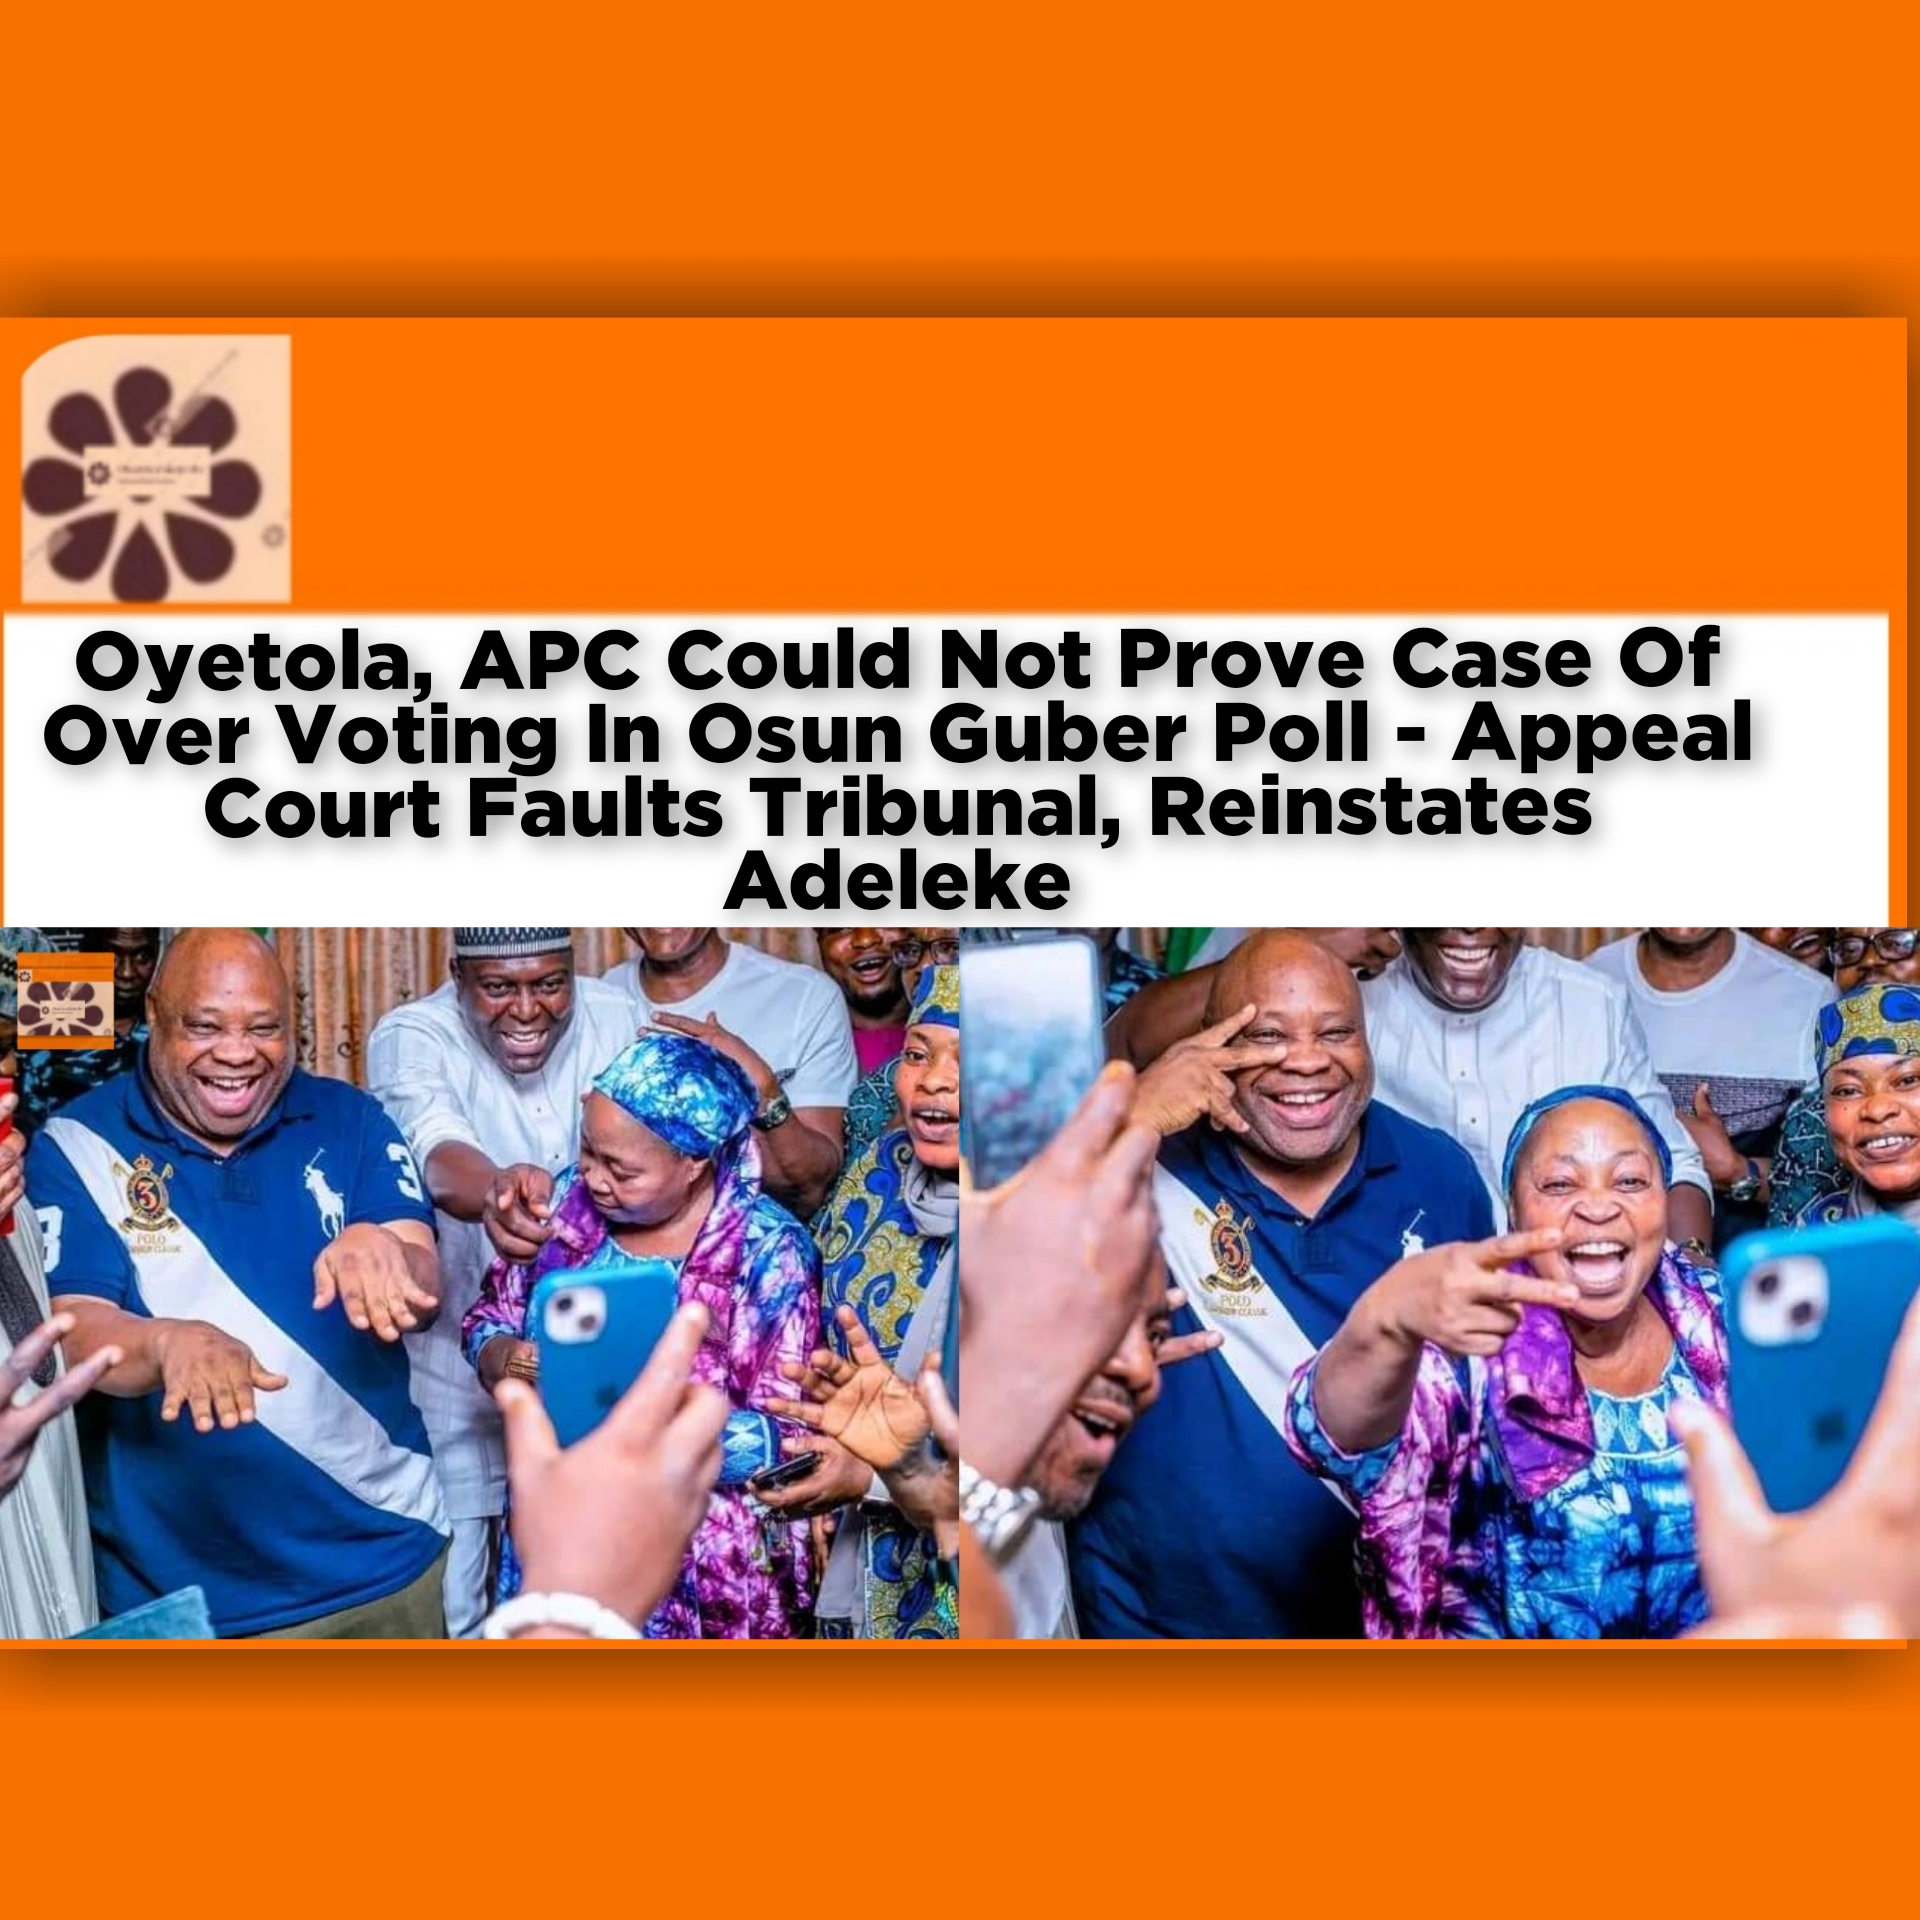 Oyetola, APC Could Not Prove Case Of Over Voting In Osun Guber Poll - Appeal Court Faults Tribunal, Reinstates Adeleke ~ OsazuwaAkonedo Breaking News